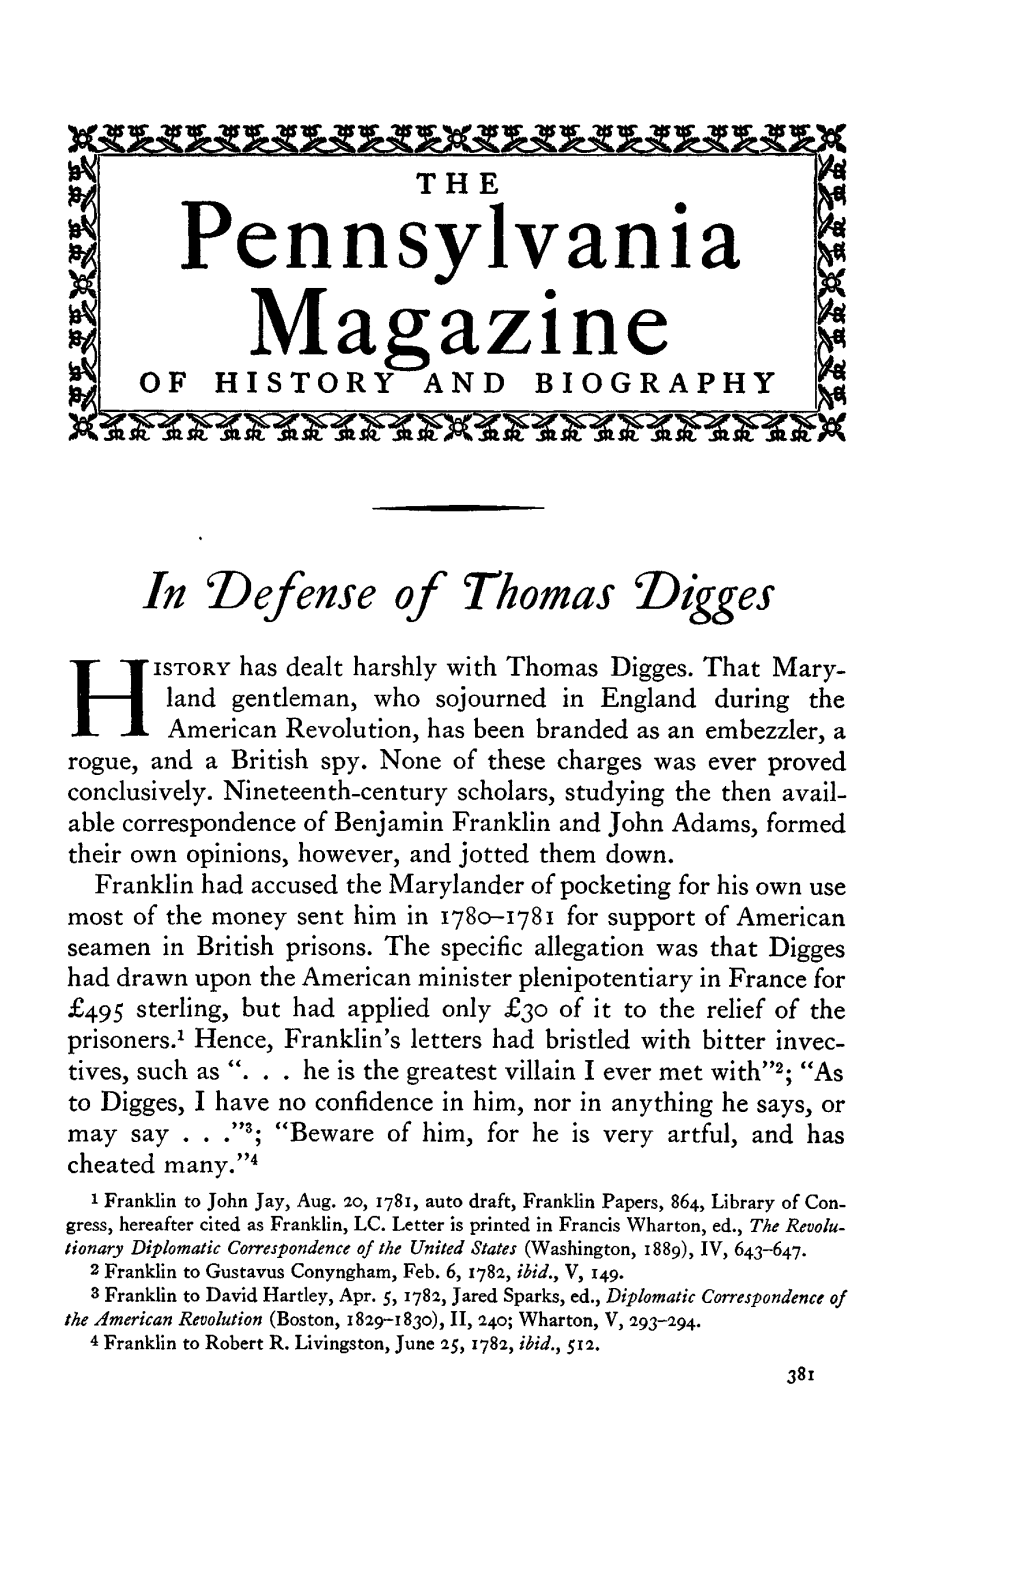 In Defense of Thomas Digges